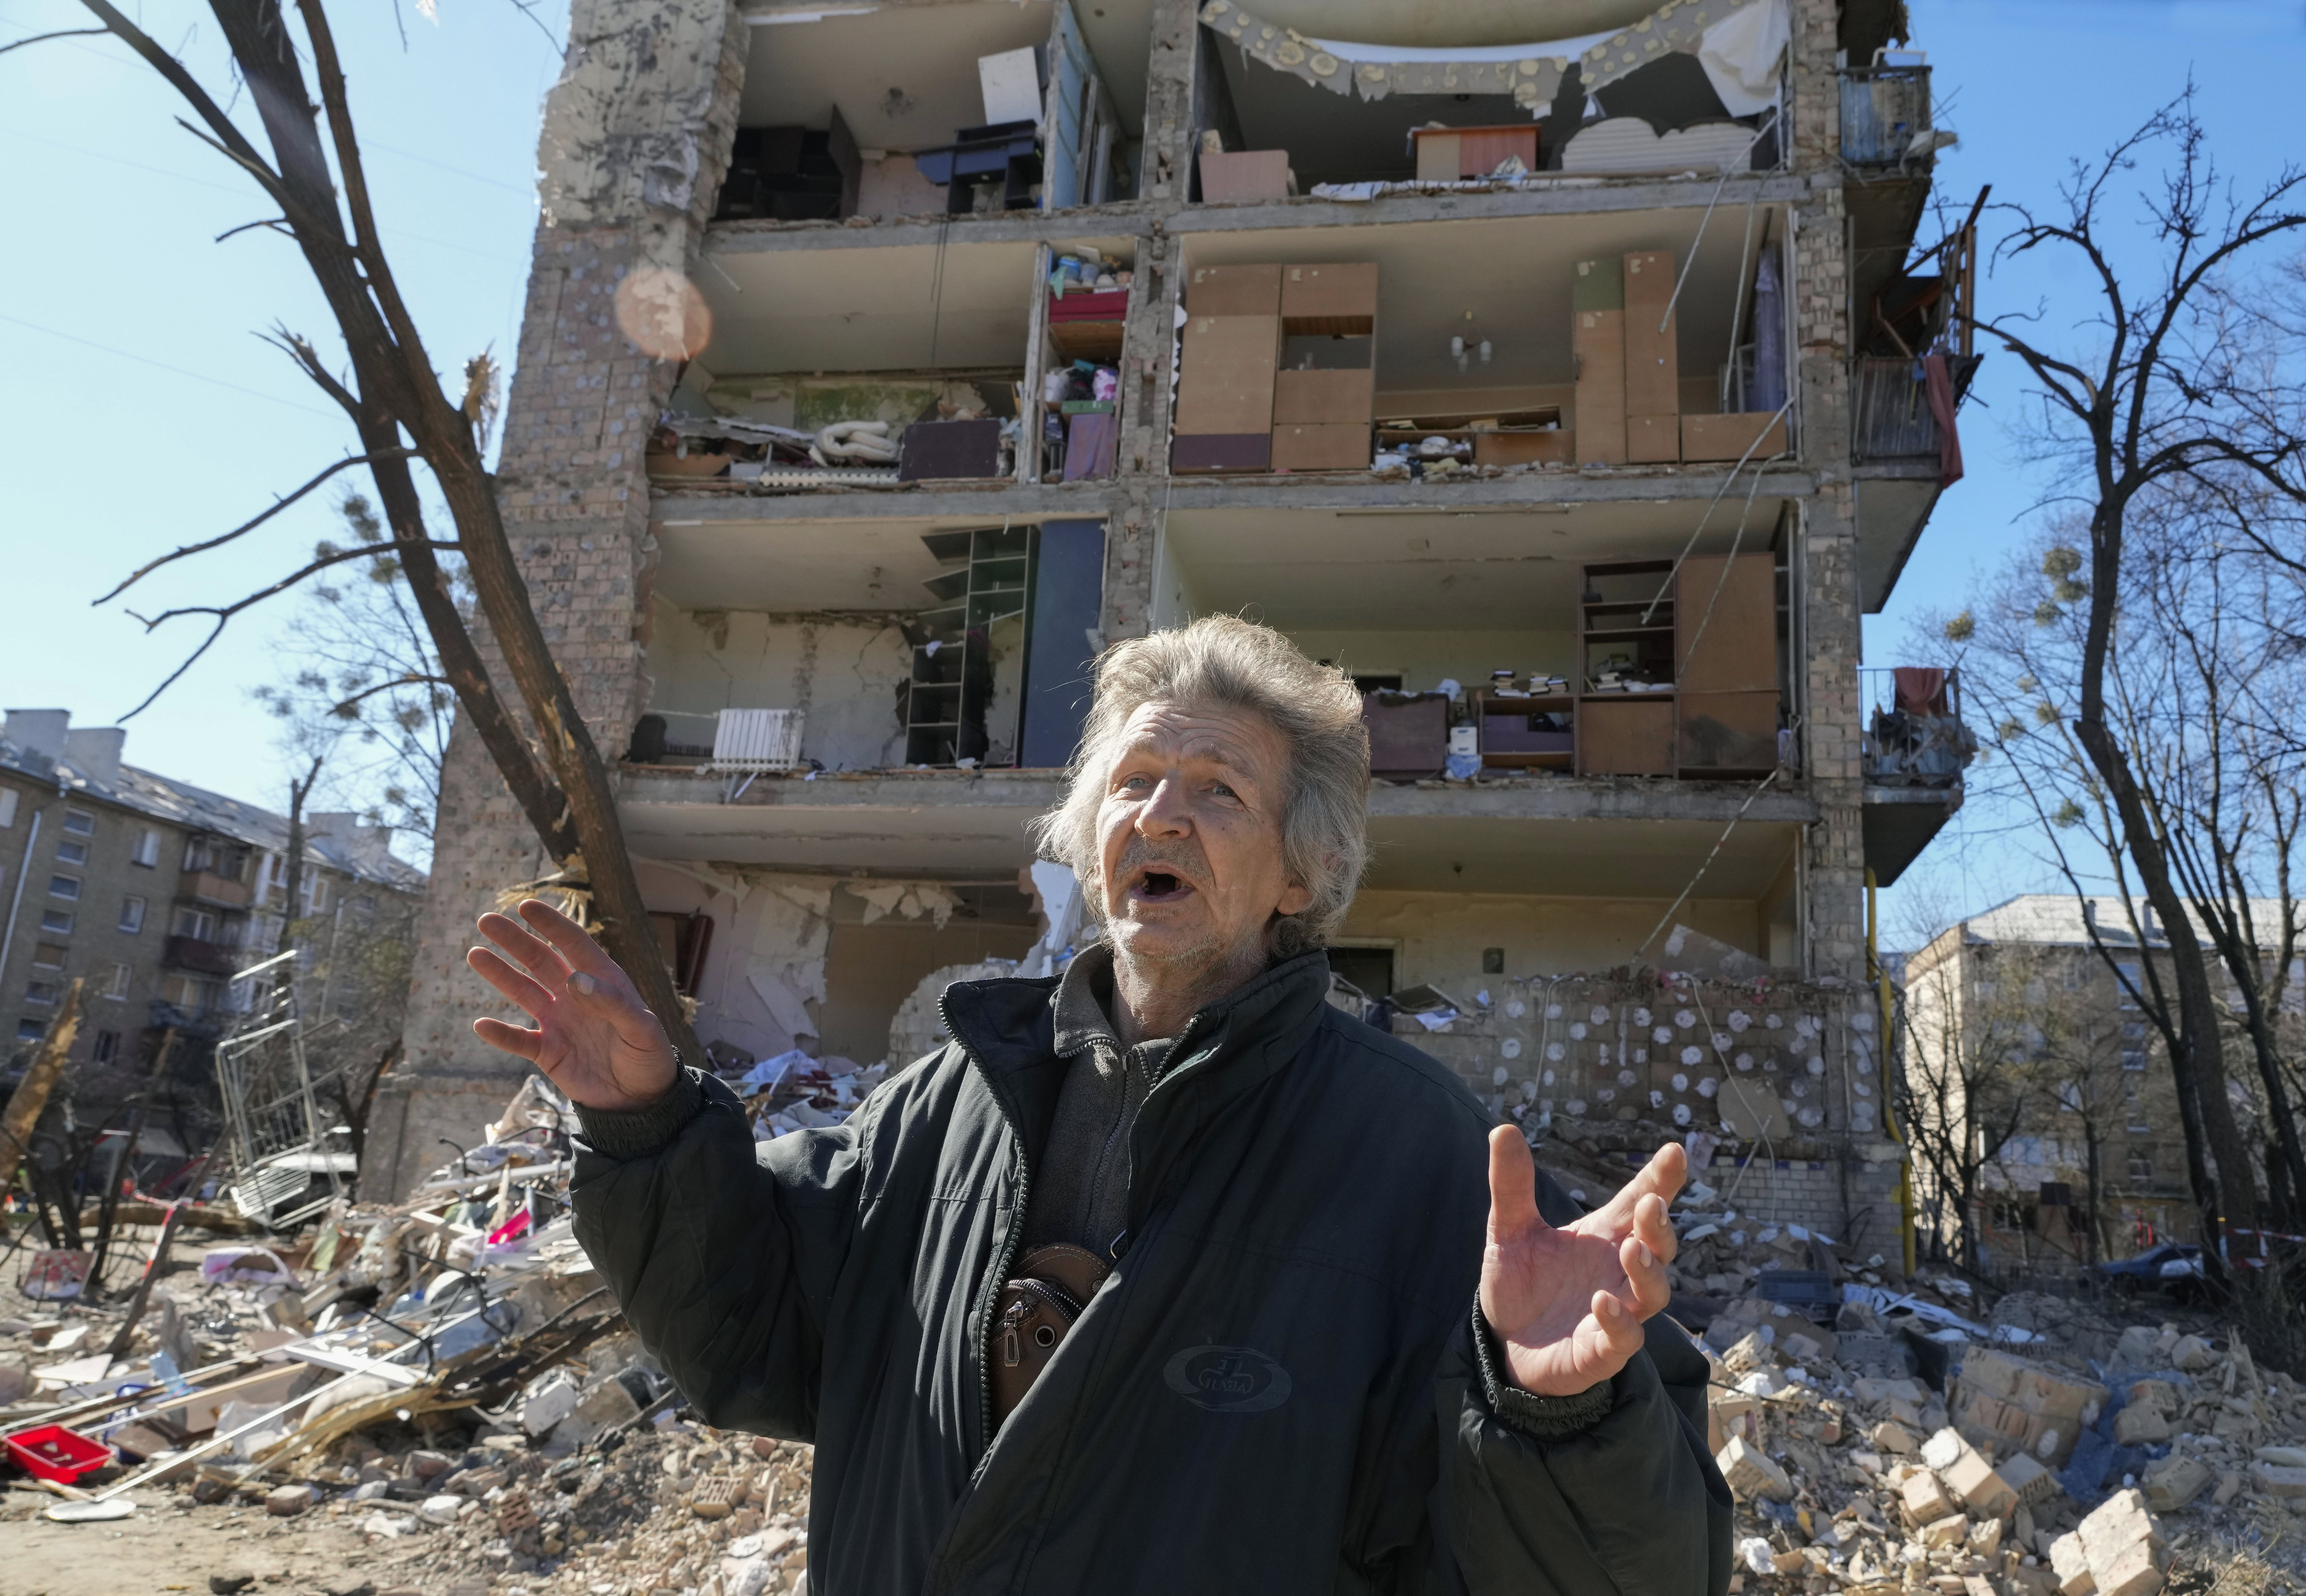 A man reacts standing near his house ruined after Russian shelling in Kyiv, Ukraine, Monday, March 21, 2022. At least eight people were killed in the attack. (Efrem Lukatsky/AP)